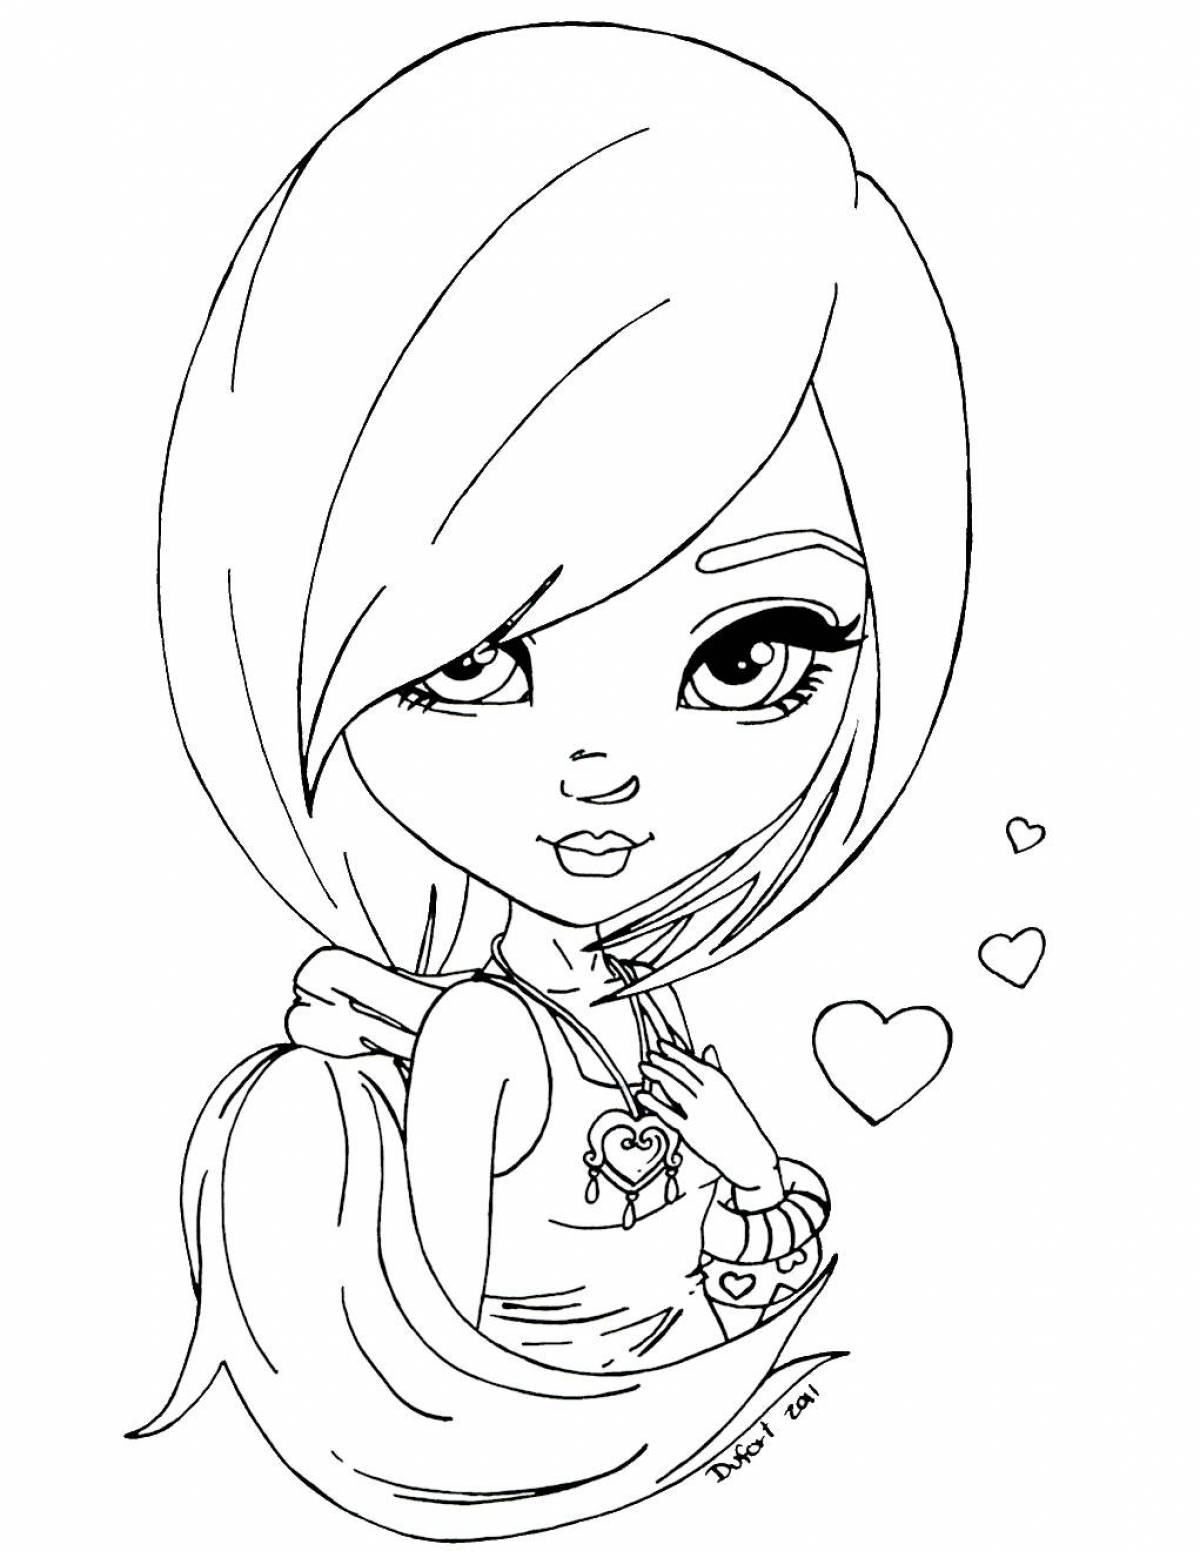 Coloring pages with taste for girls